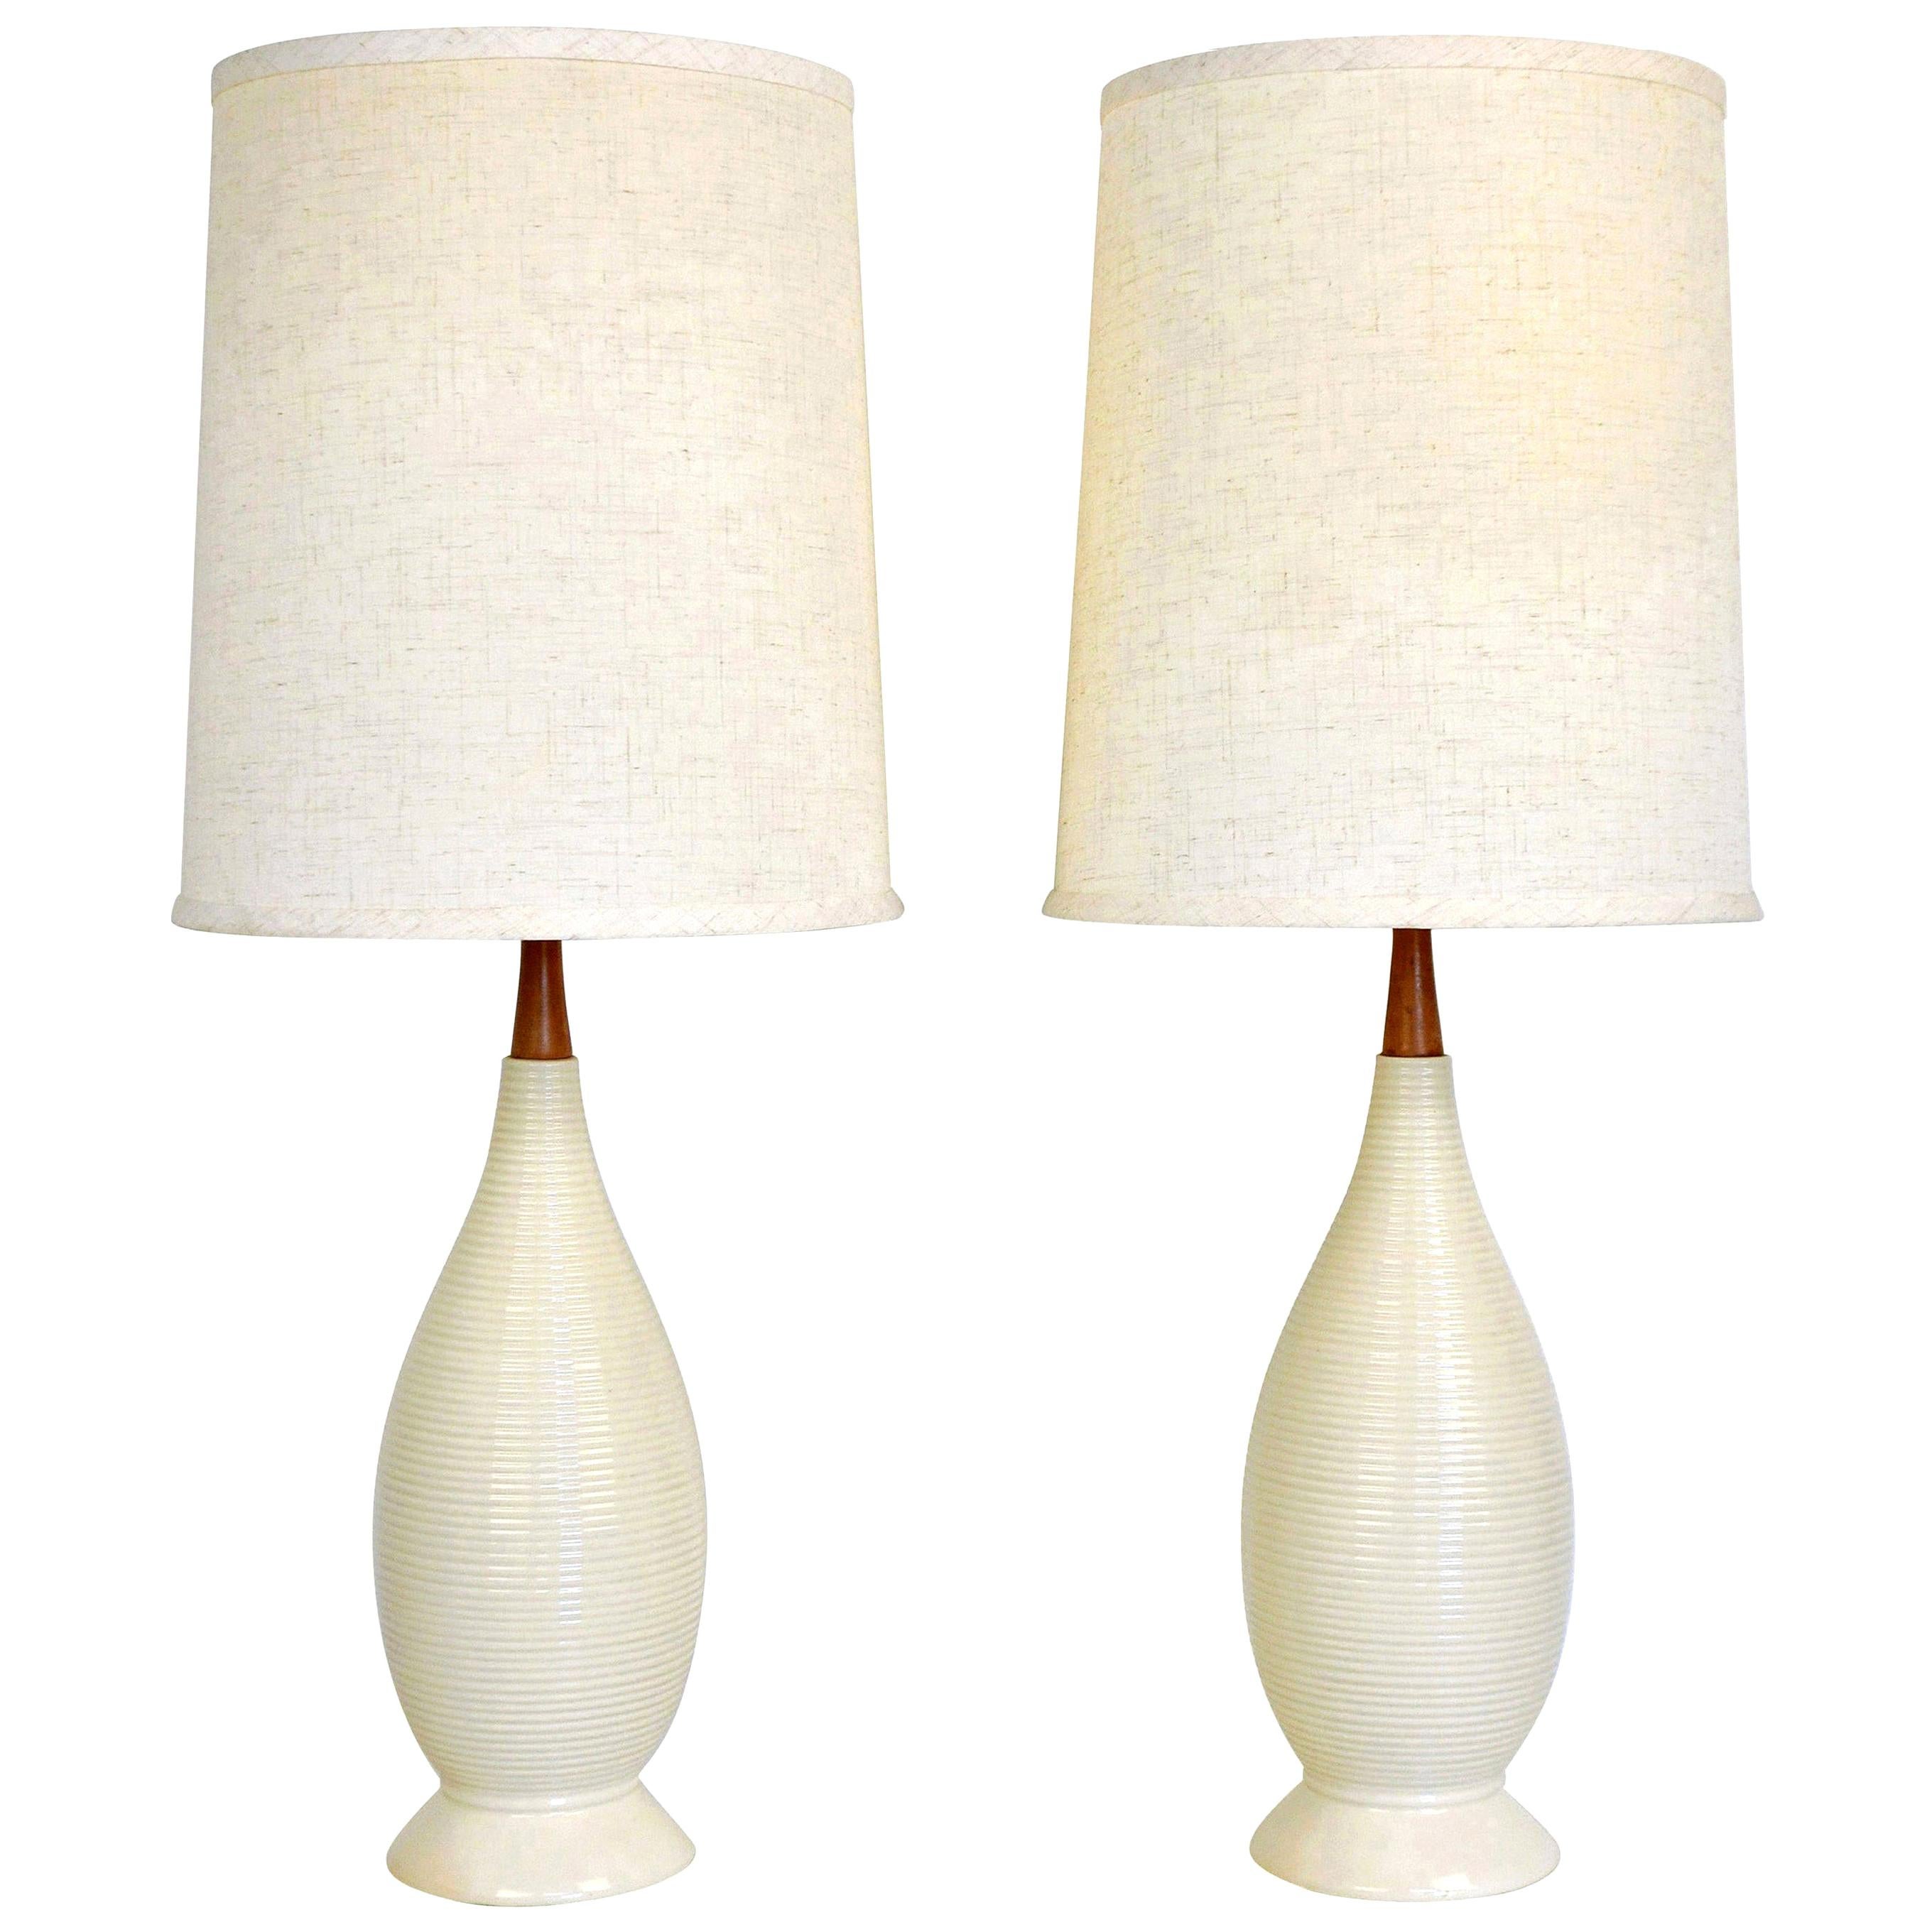 Pair of Mid-Century Modern White Beehive Lamps